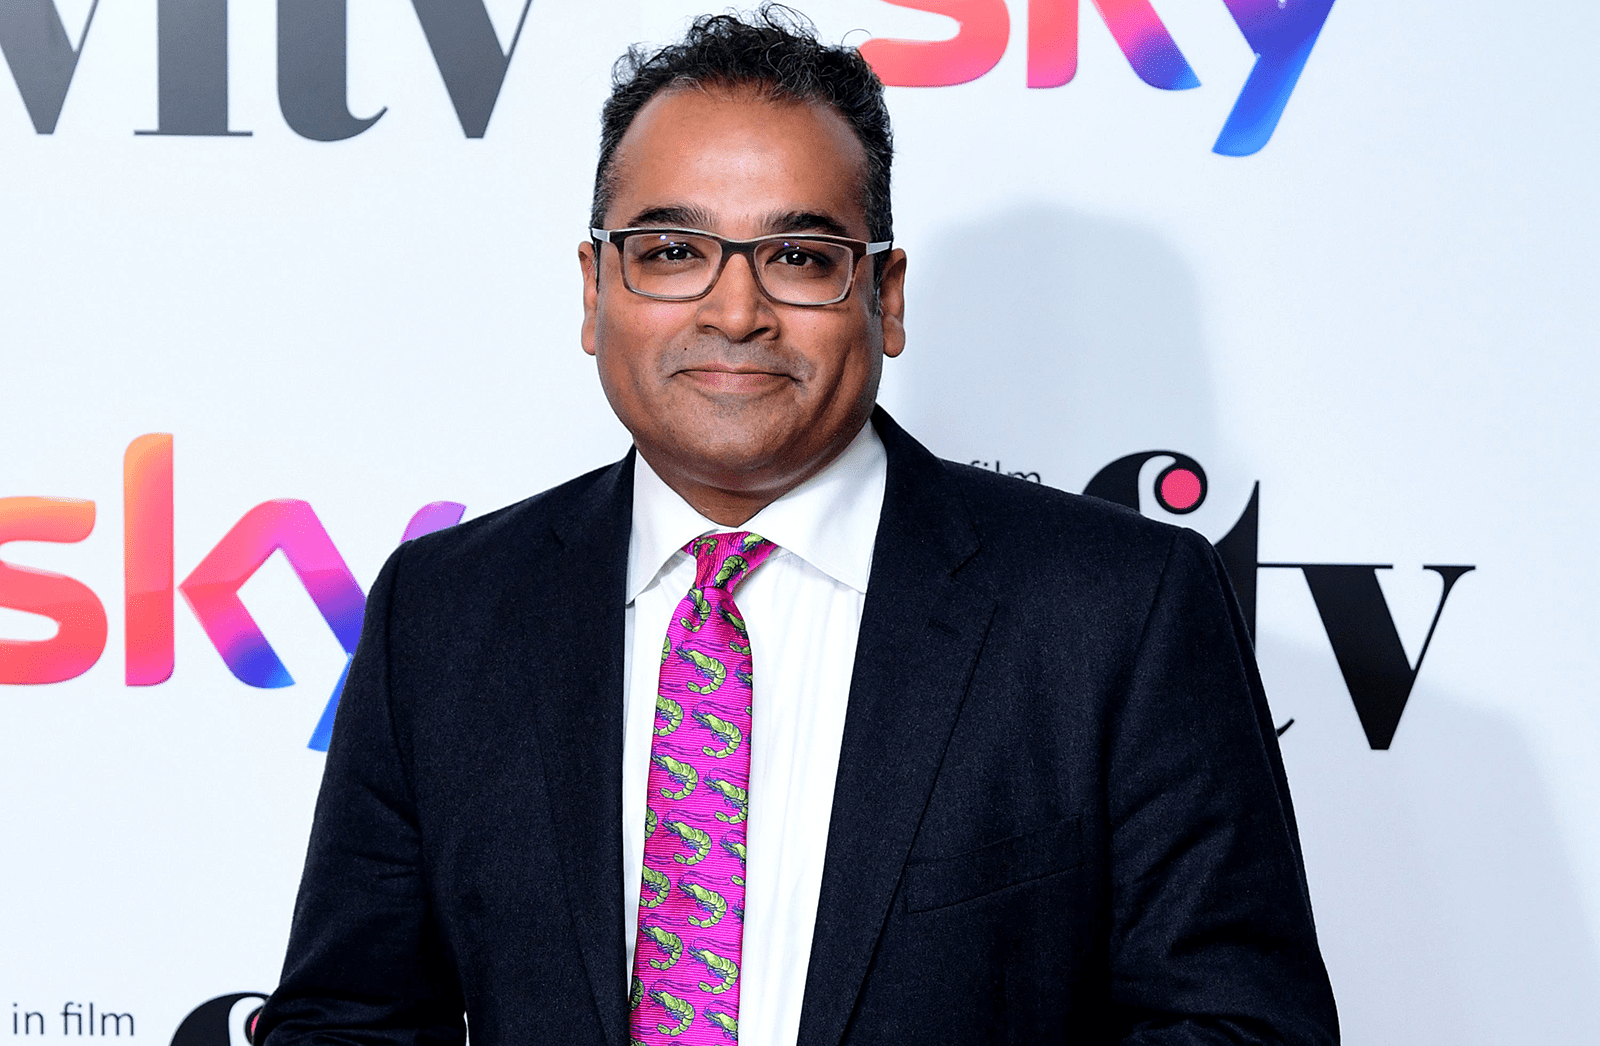 Support pours in for Krishnan Guru-Murthy after he’s taken off air